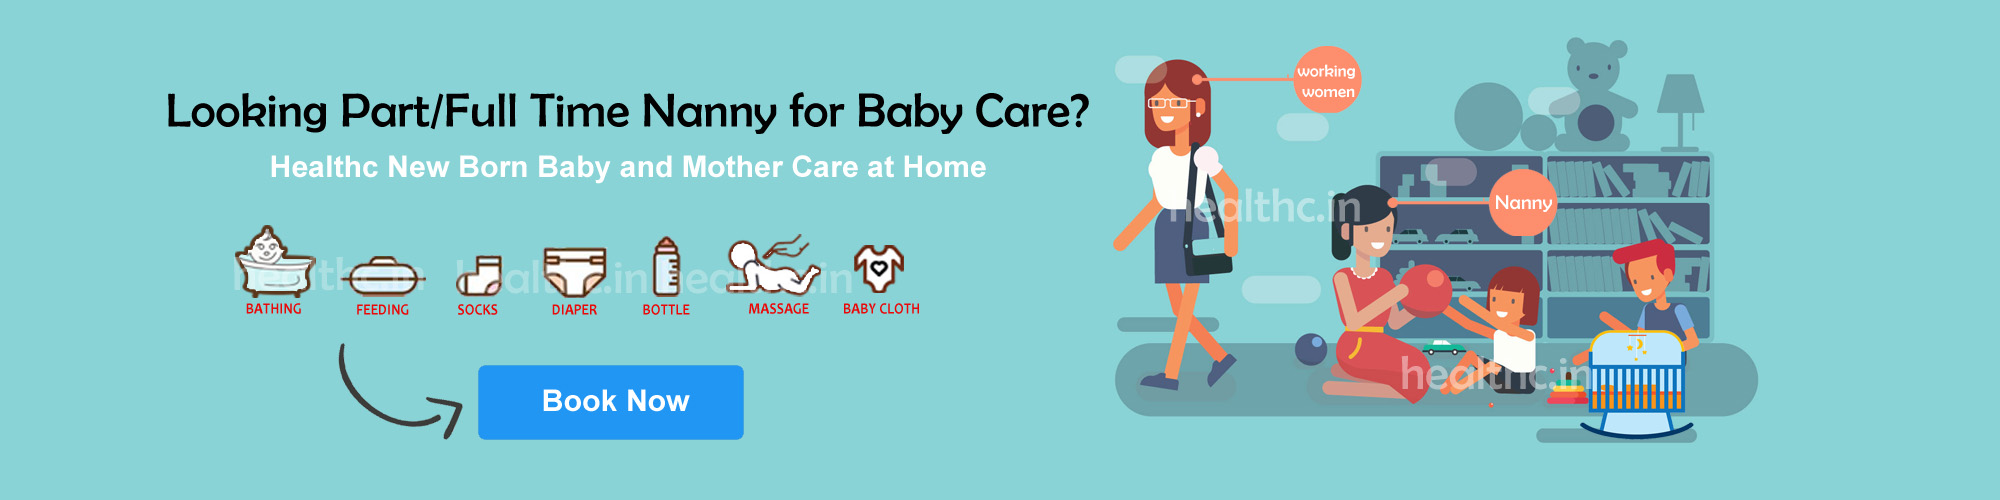 home baby care service